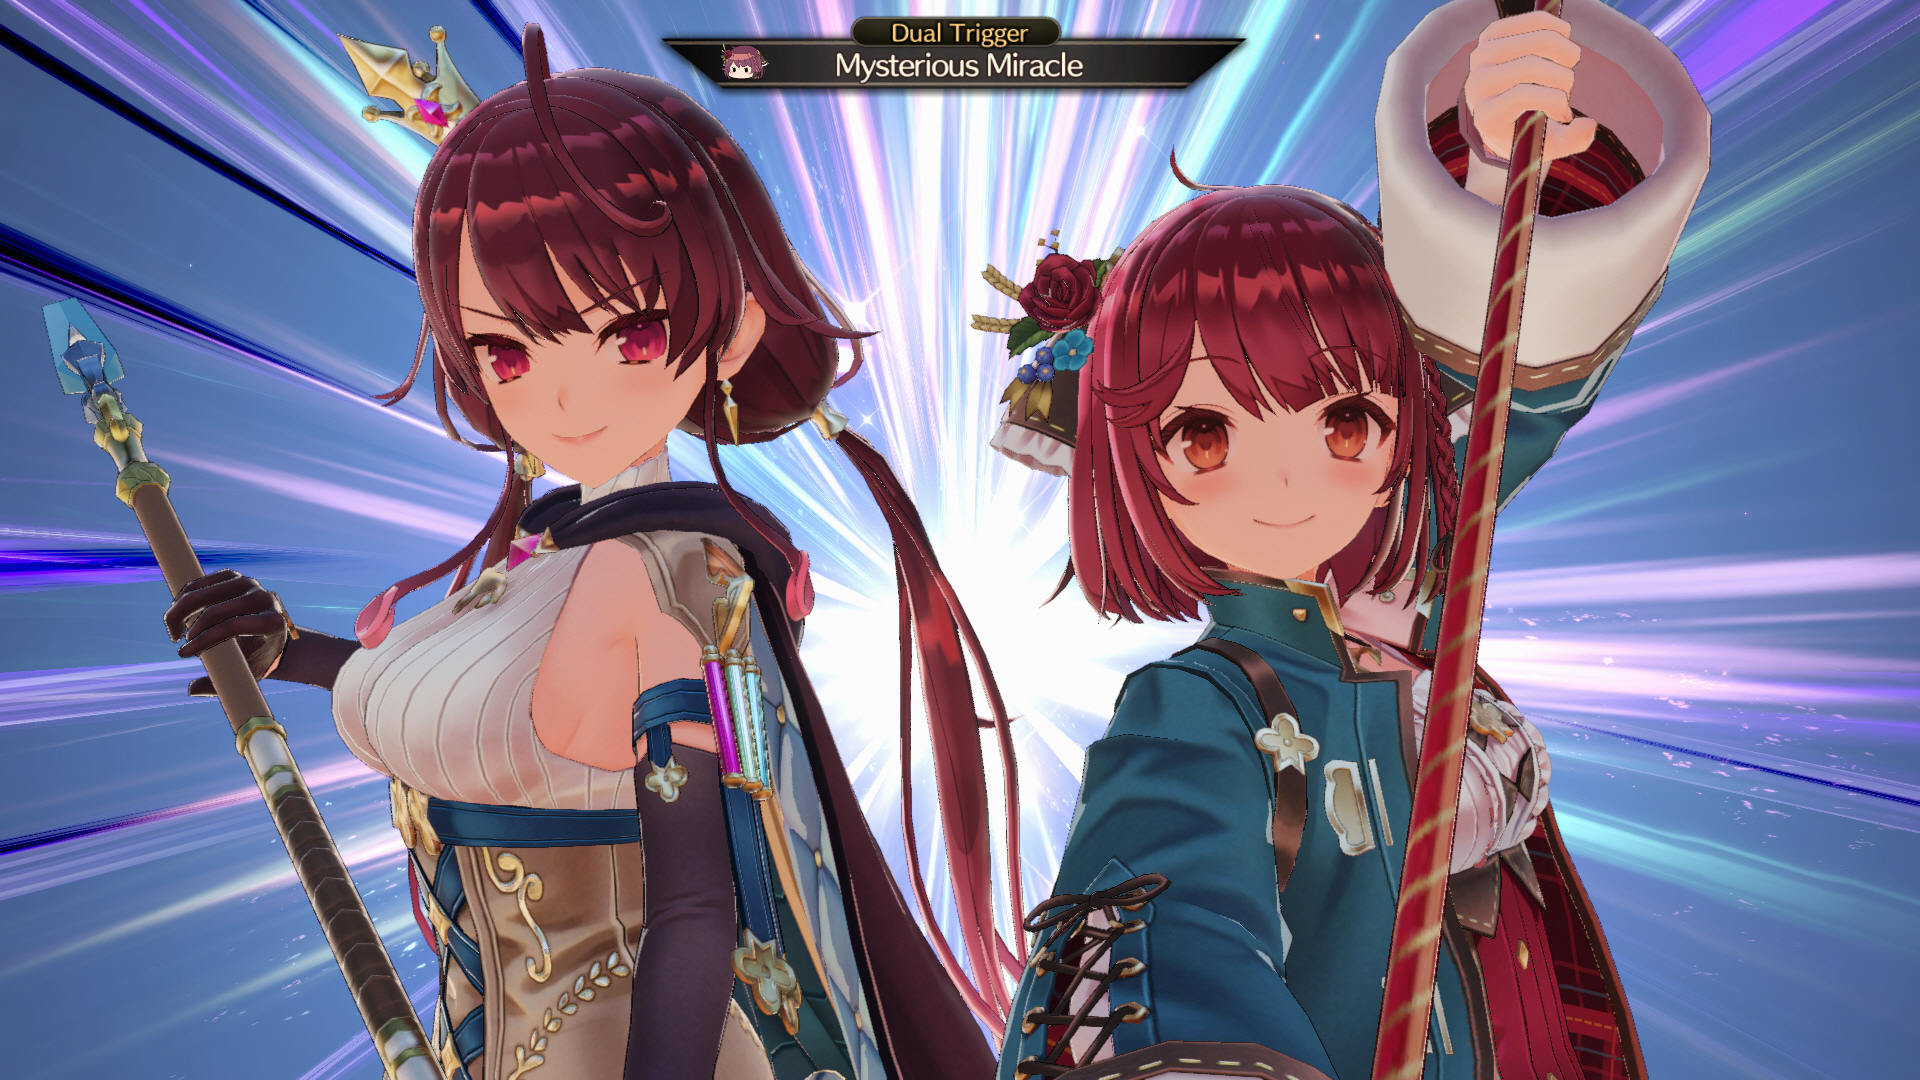 Atelier sophie 2 the alchemist of the mysterious dream screenshot 10 11